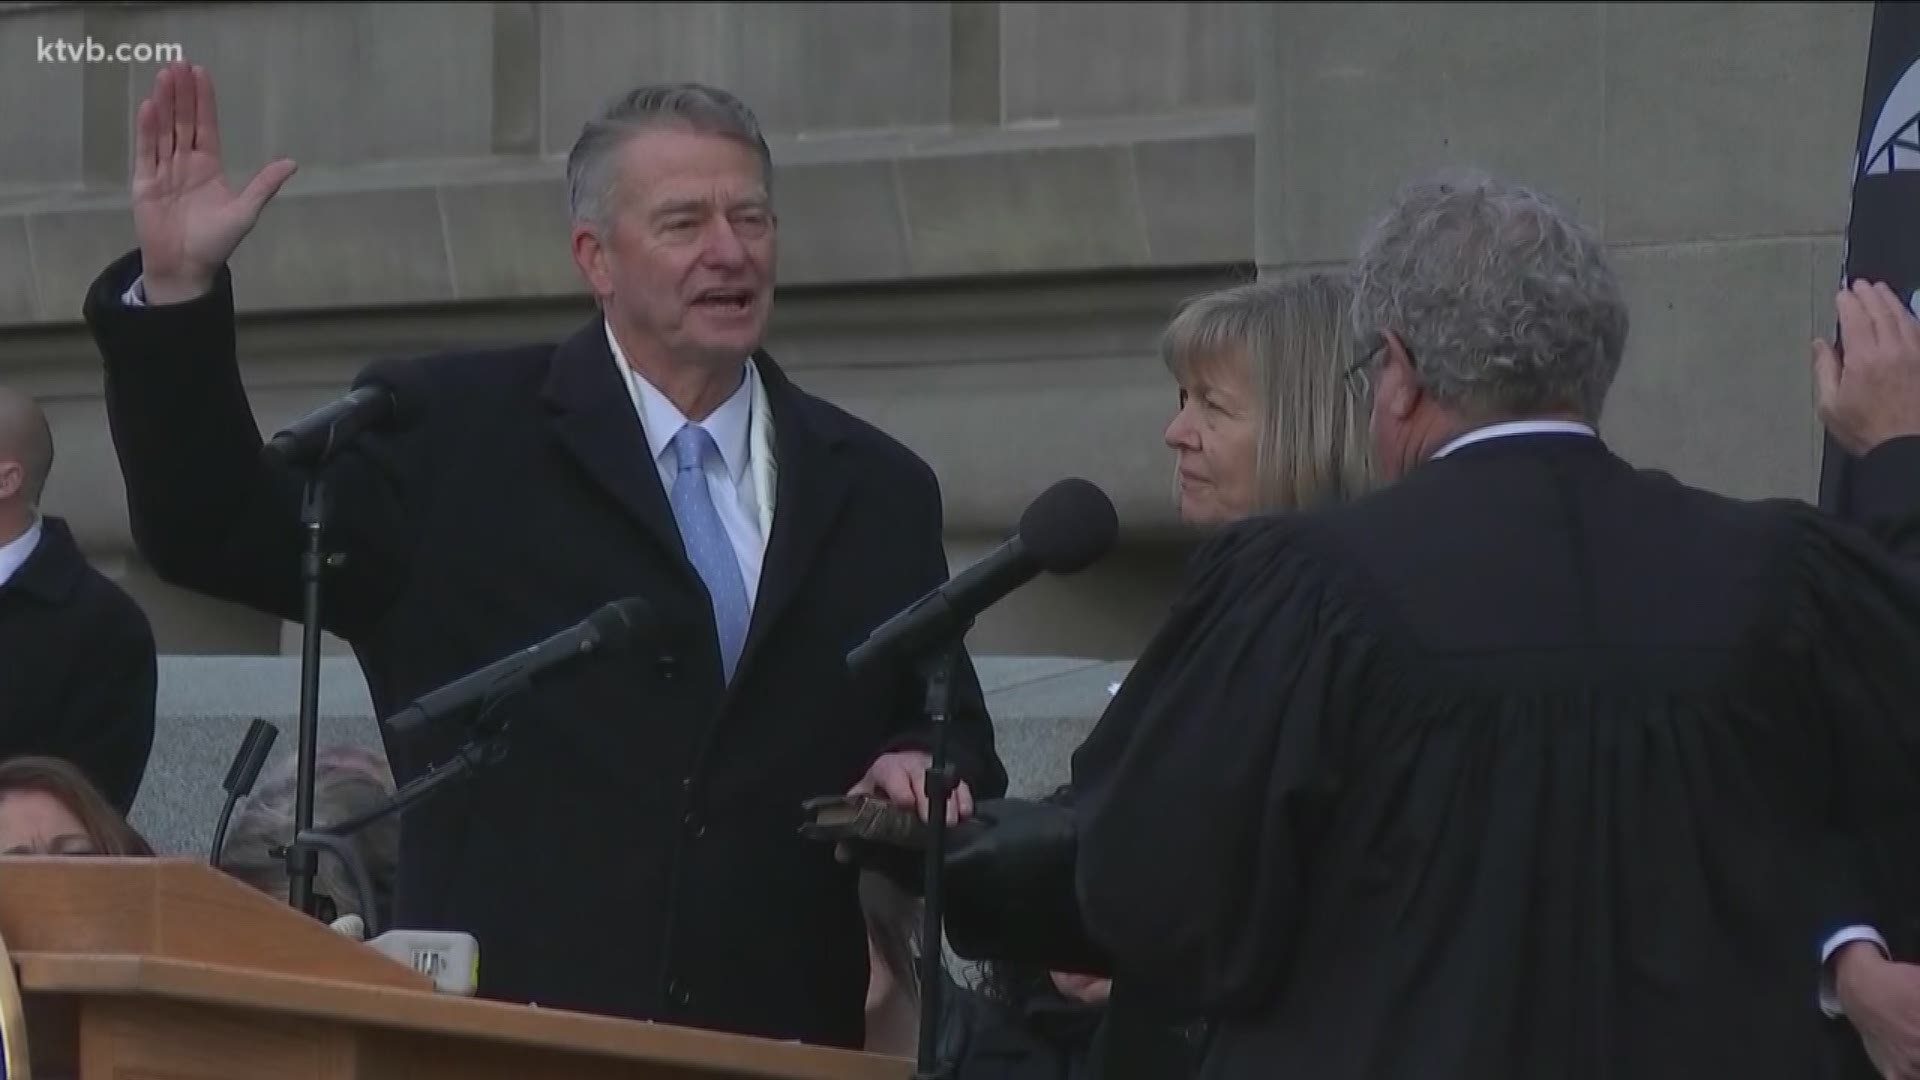 Brad Little was one of seven top elected officials that took the oath of office during Friday's inauguration ceremony in Boise.